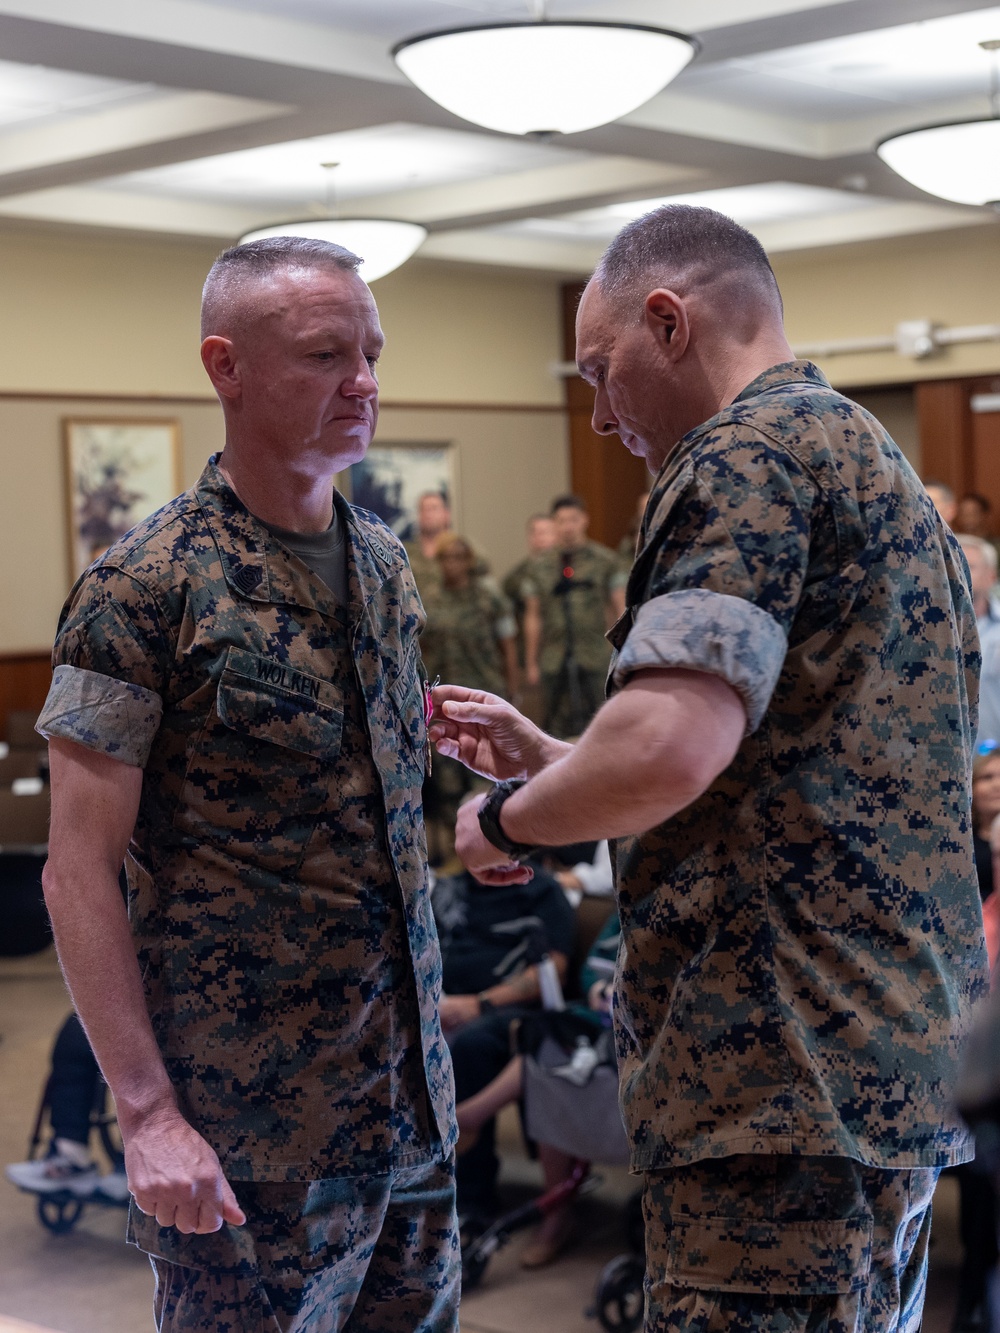 Sergeant Major Jason Wolken retires after 30 years of dedicated service